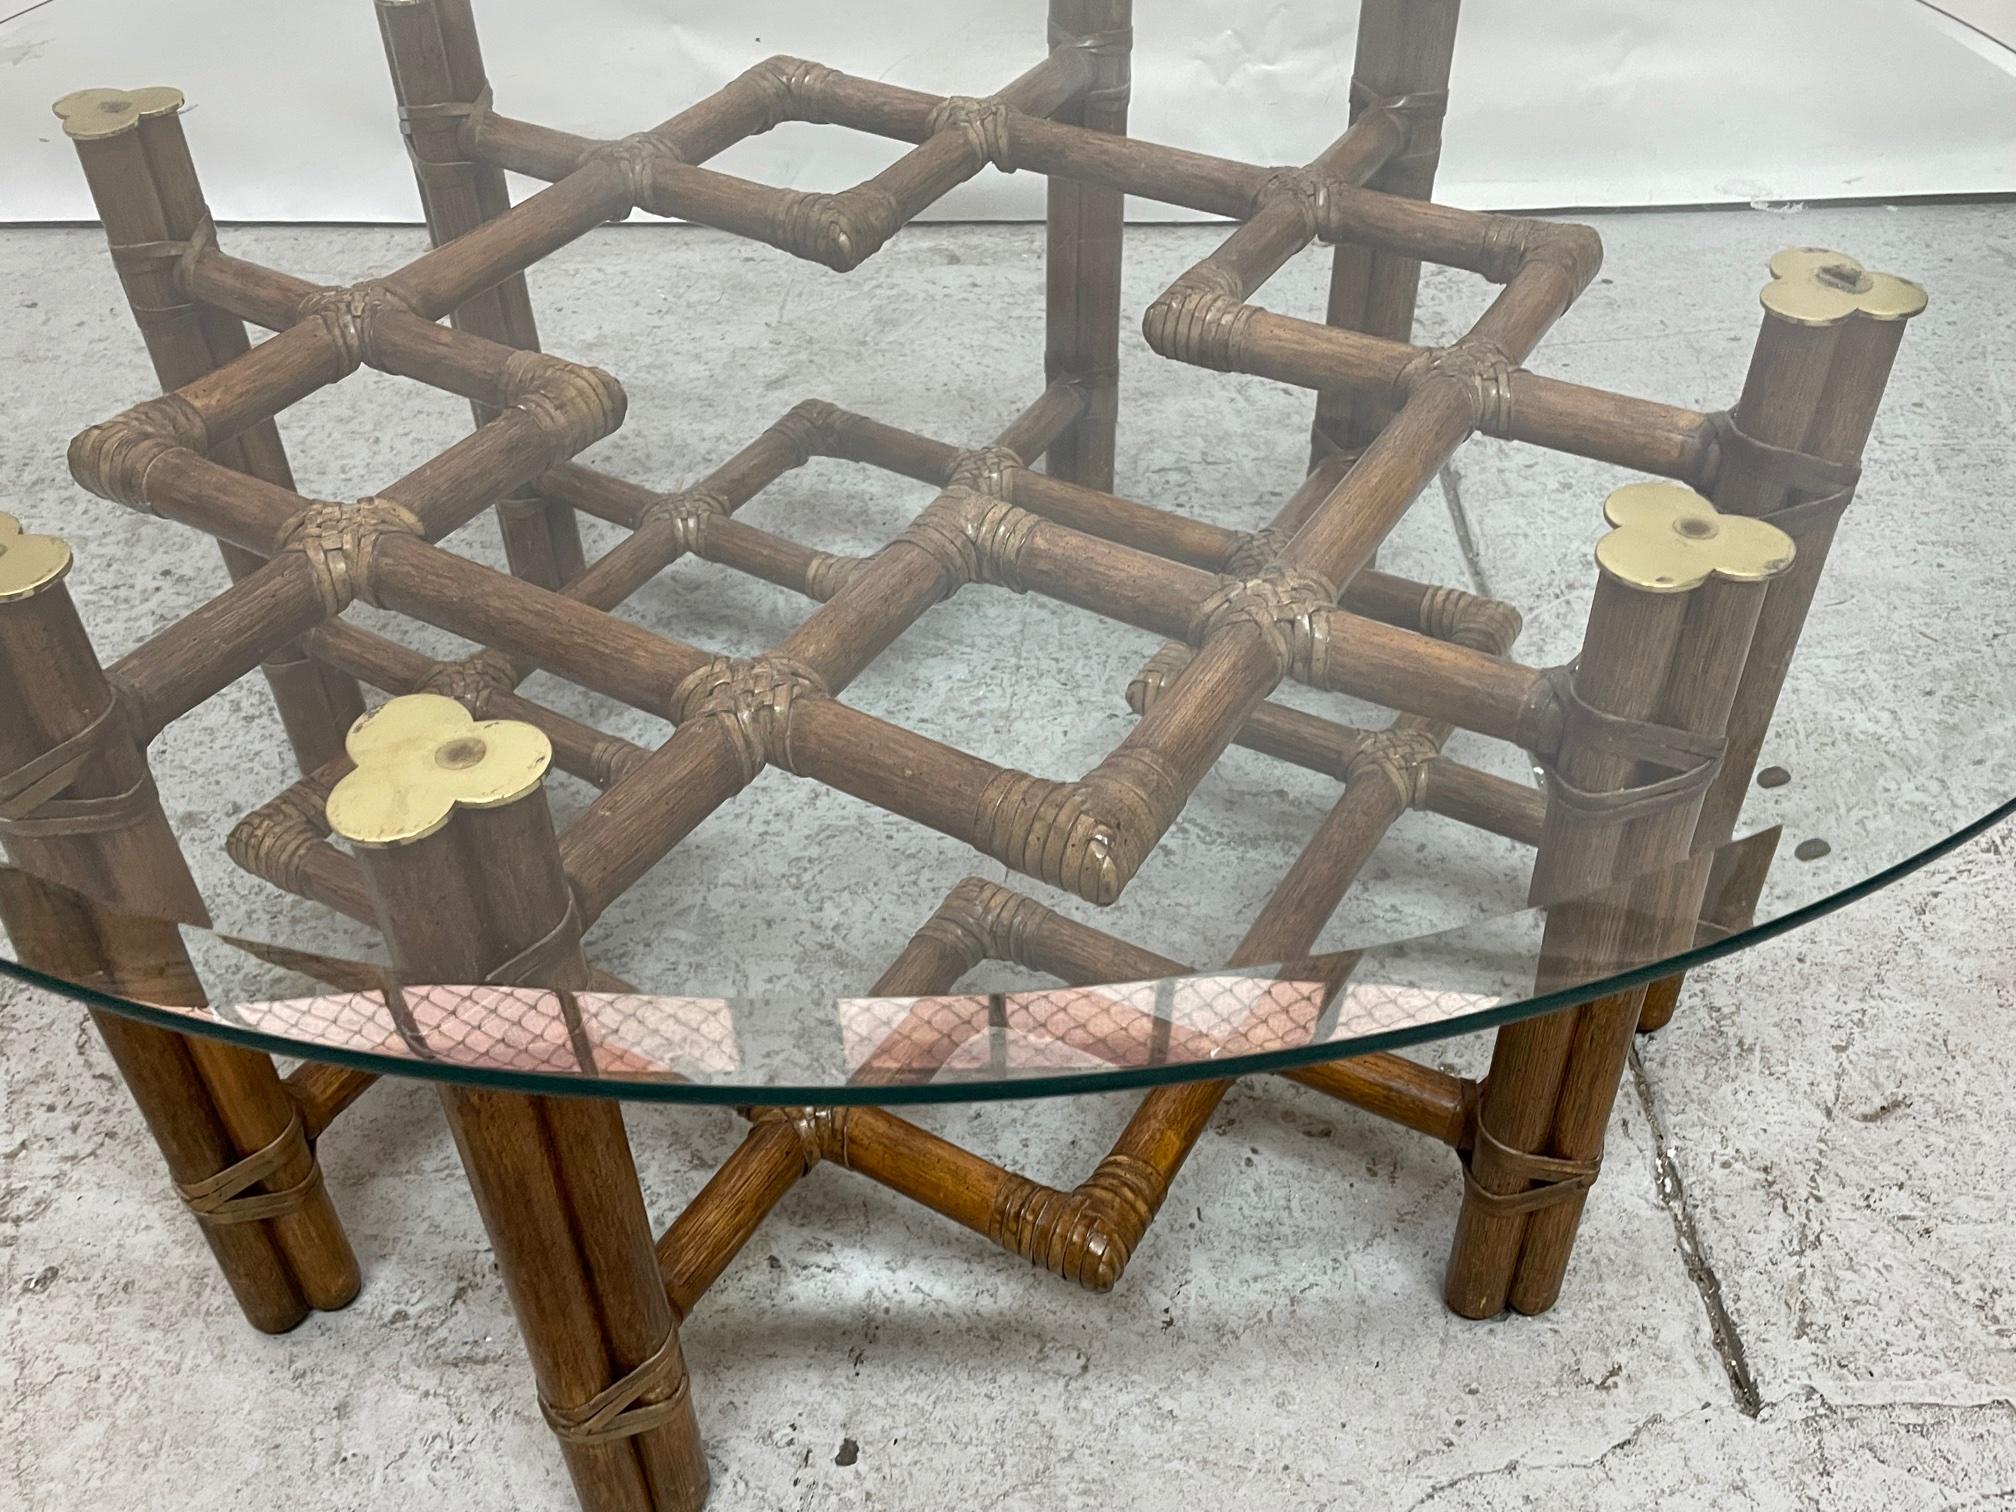 Vintage rattan coffee/cocktail table by McGuire features a modern take on chinoiserie style fretwork and brass detailing. 42